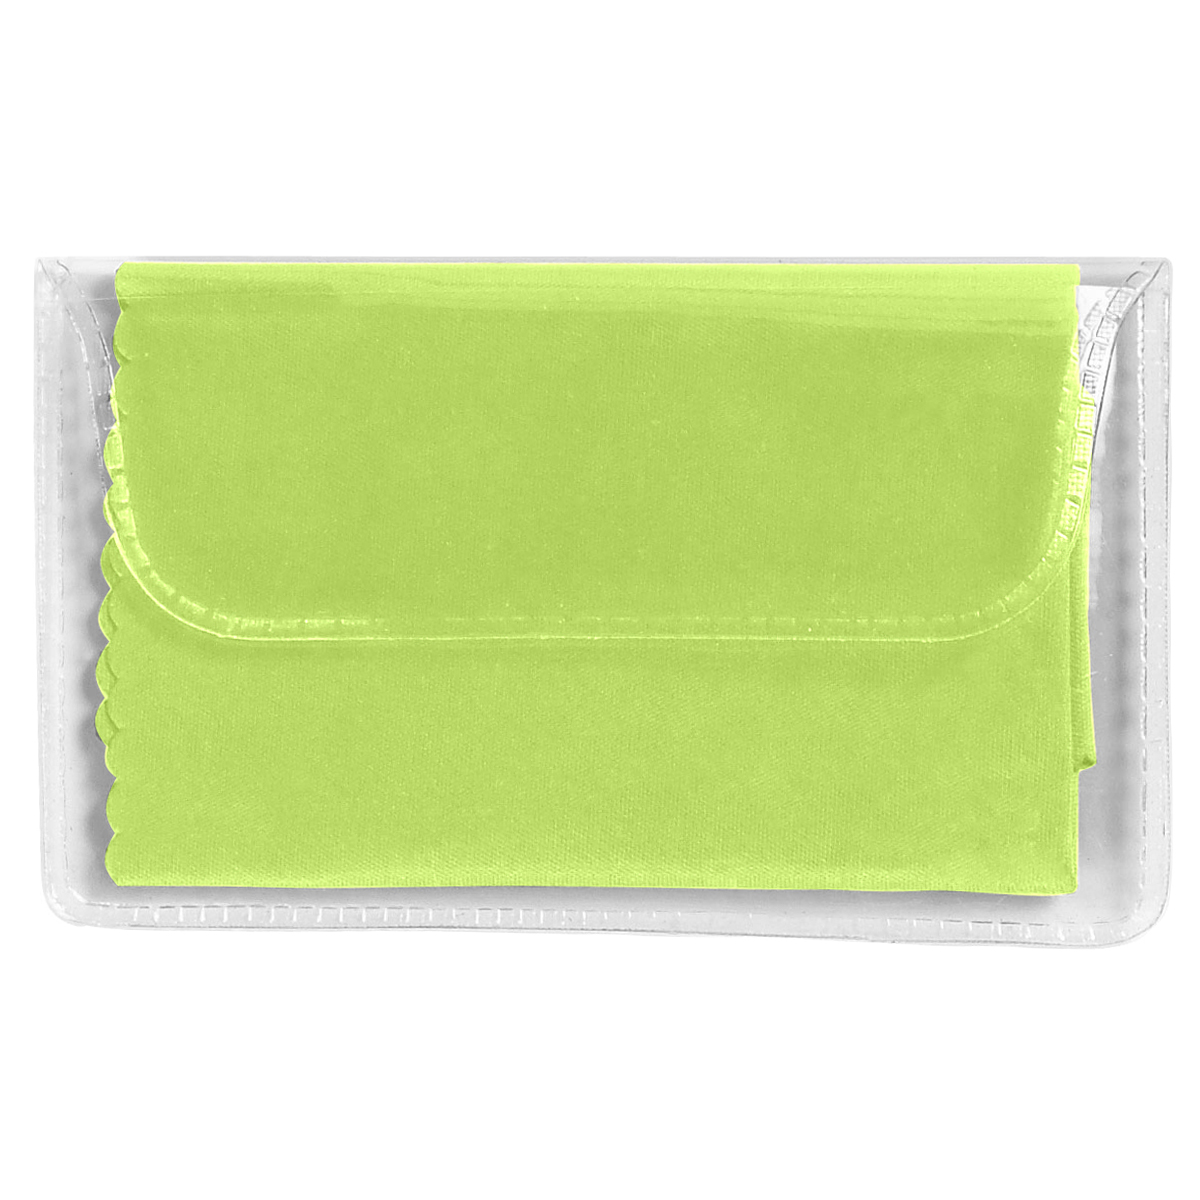 Imprinted Microfiber Cleaning Cloth In Case